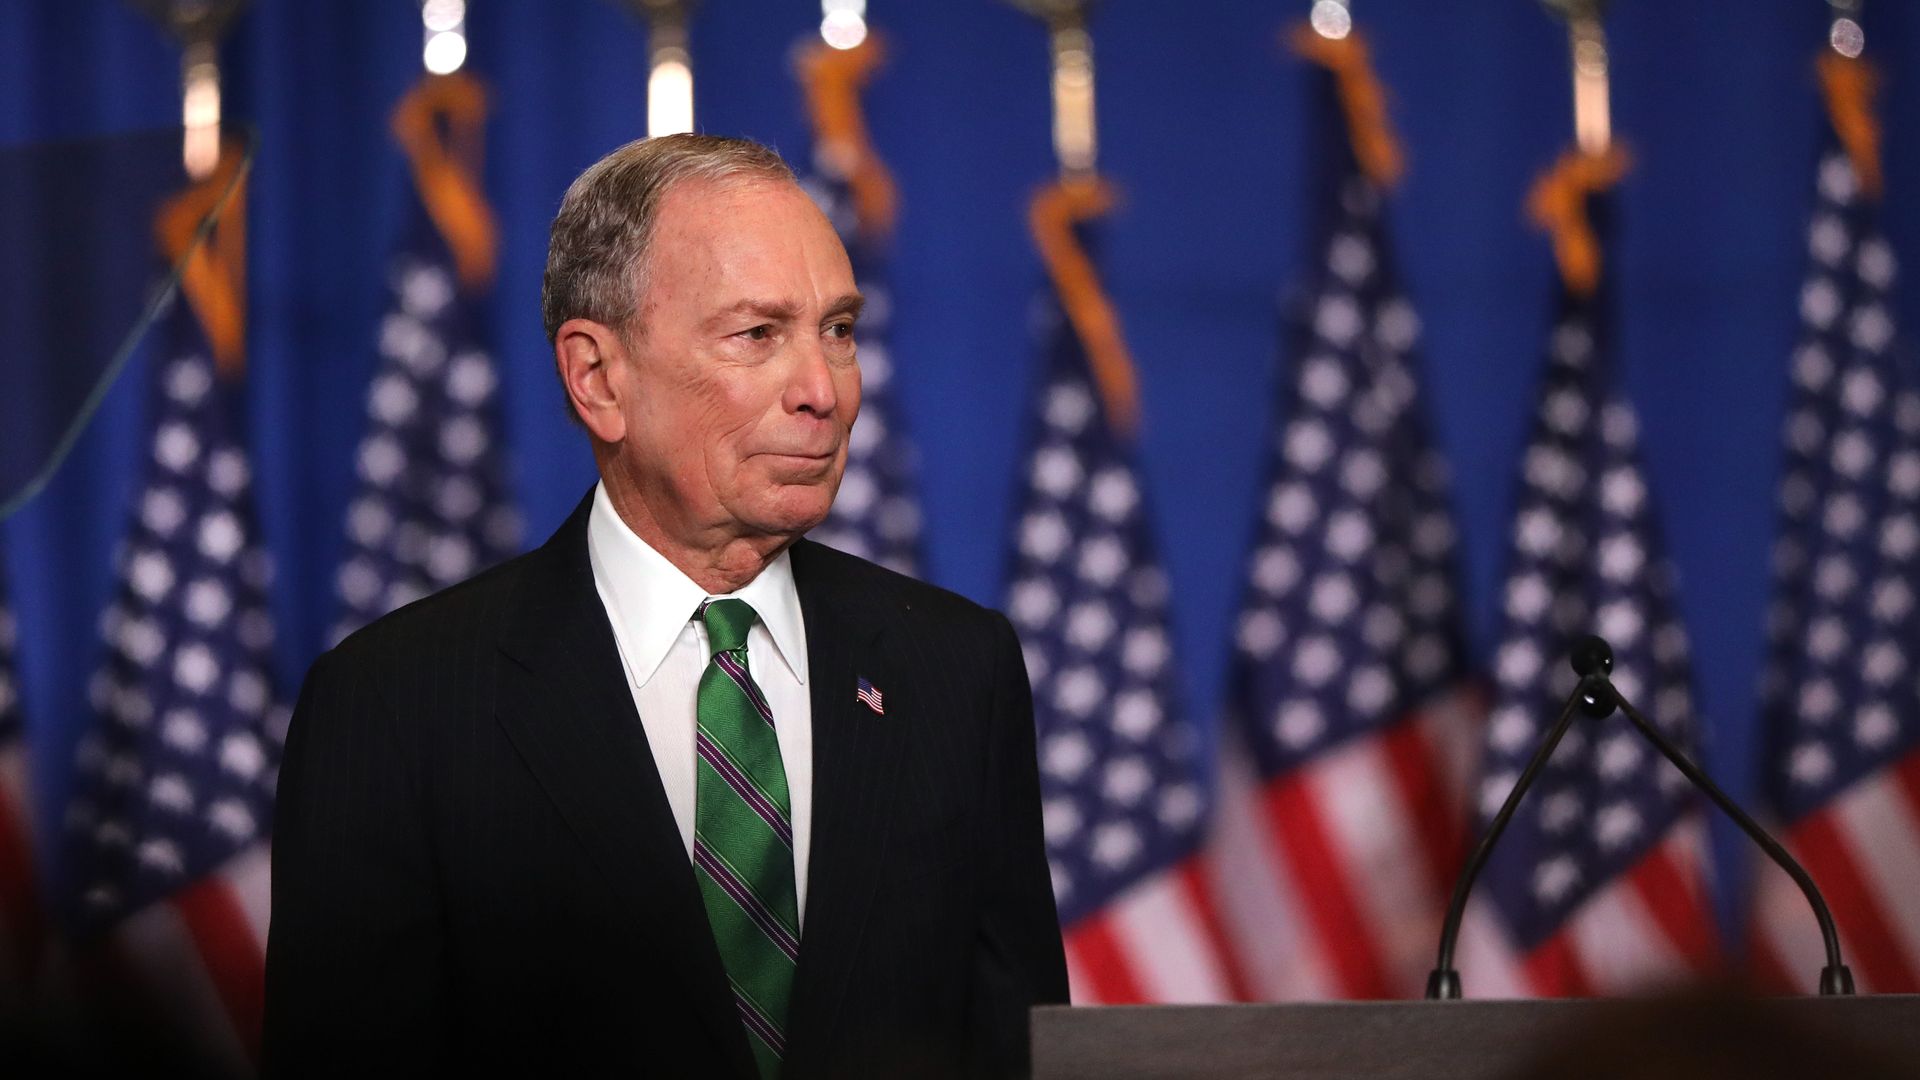  Mike Bloomberg addresses his staff and the media after ending his presidential campaign.